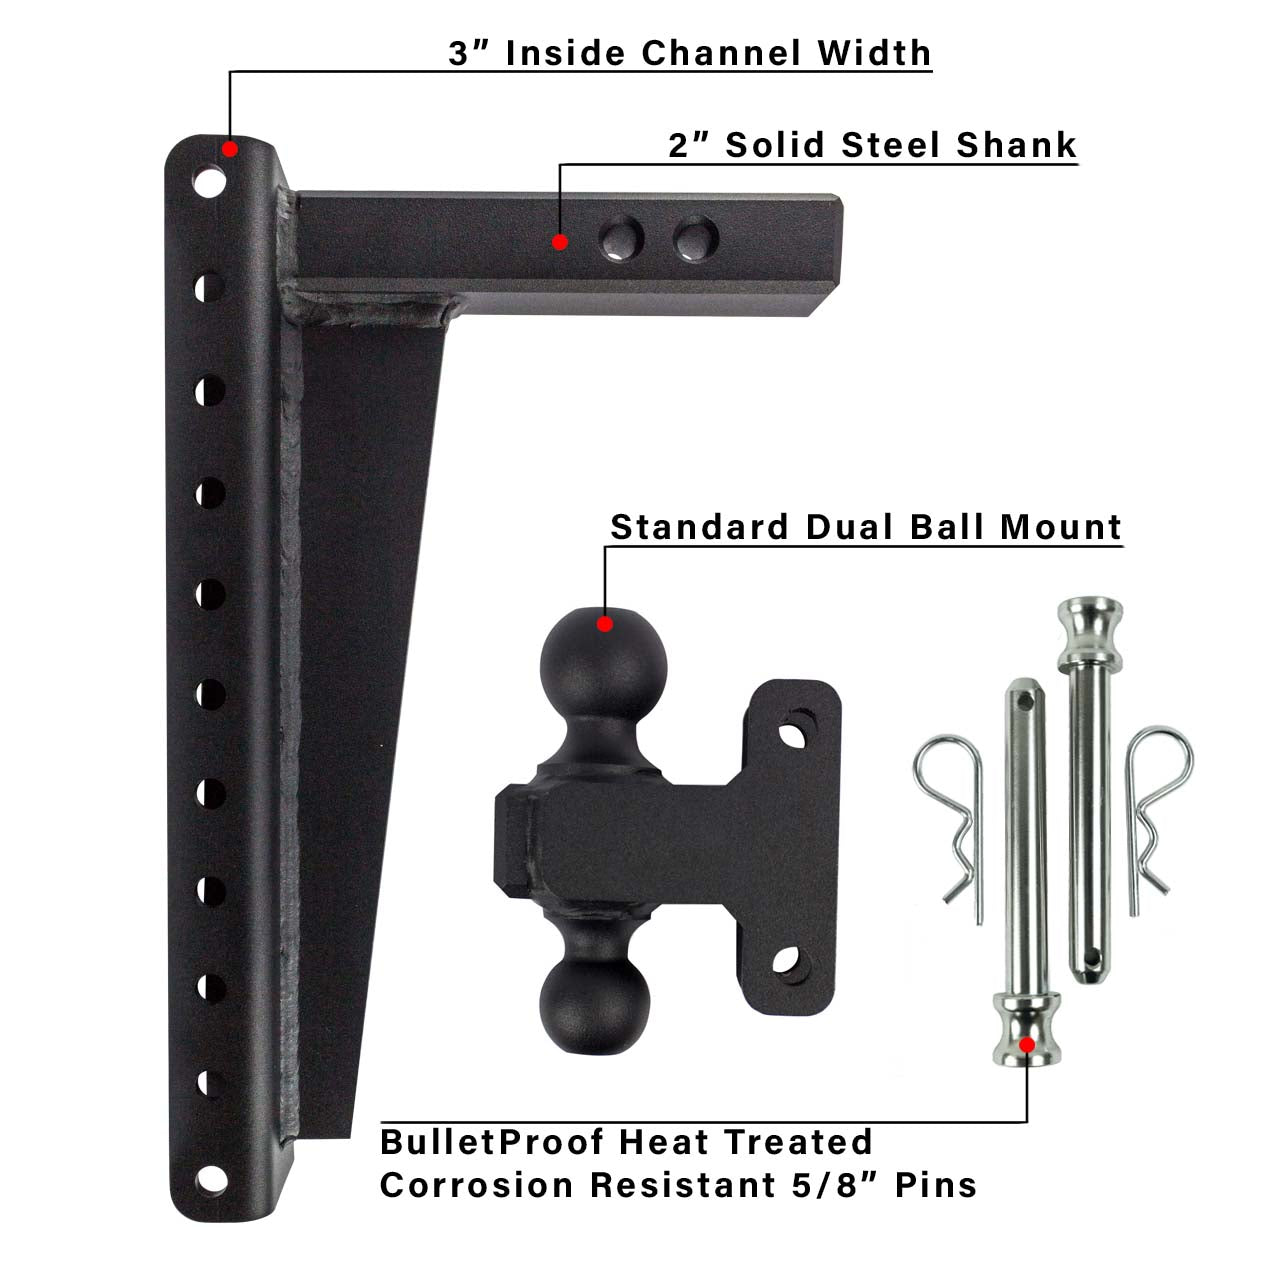 2.0" Heavy Duty 16" Drop/Rise Hitch Included Parts